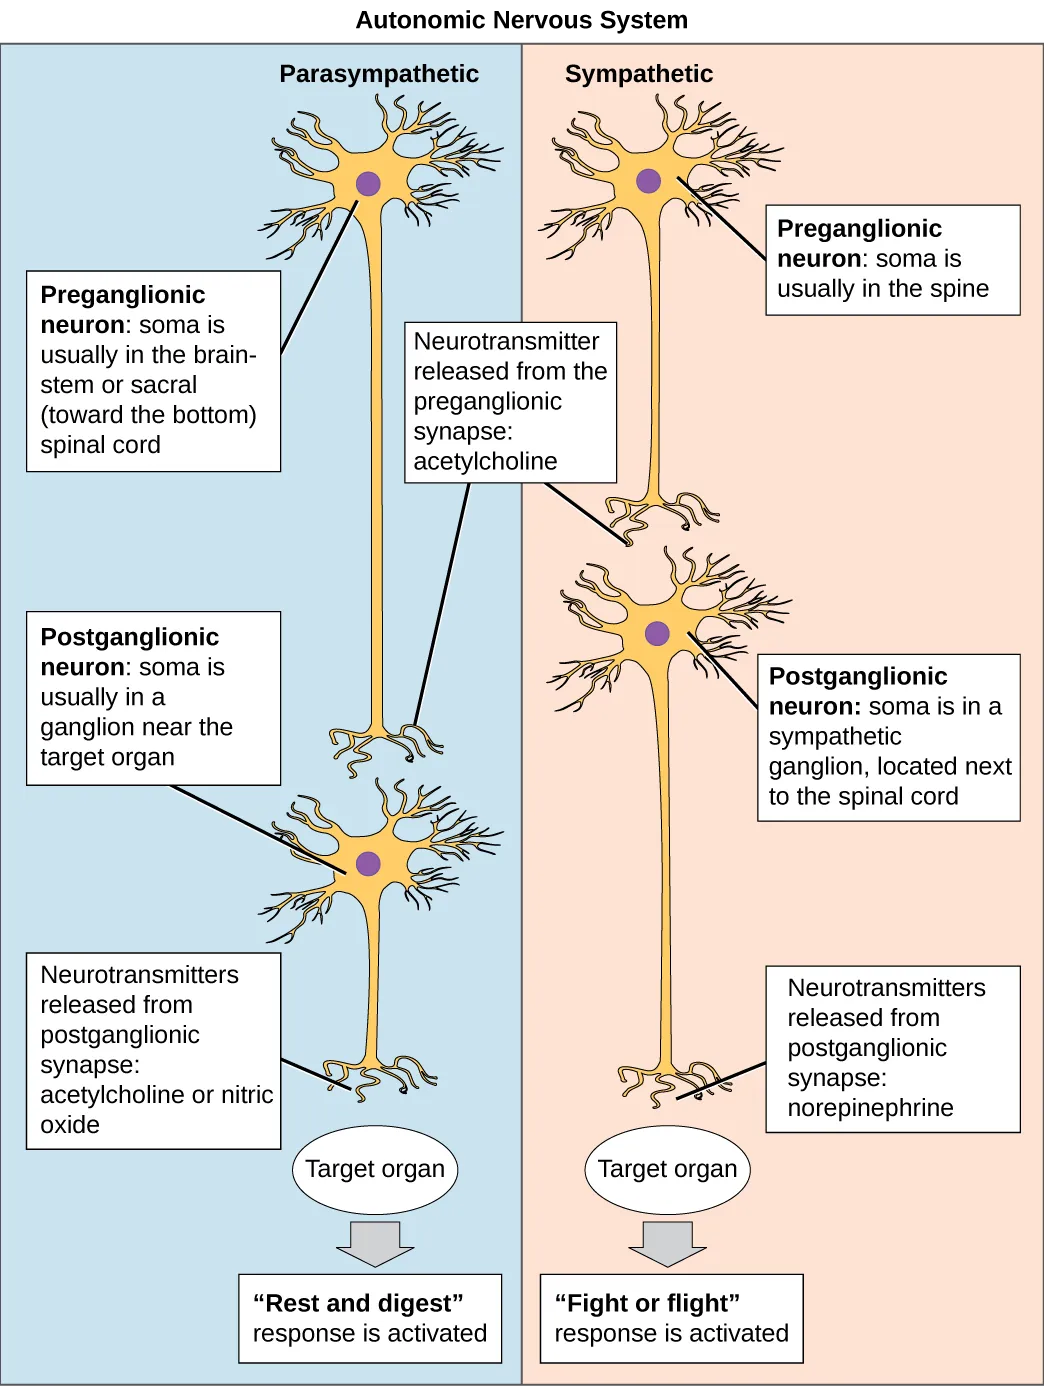 The autonomic nervous system is divided into sympathetic and parasympathetic systems. In the sympathetic system, the soma of the preganglionic neurons is usually located in the spine while in the parasympathetic system the soma is usually in the brainstem or sacral, at the bottom of the spine. In both systems, the preganglionic neuron releases the neurotransmitter acetylcholine into the synapse. Postganglionic neurons of the sympathetic system have somas in a sympathetic ganglion, located next to the spinal cord. Postganglionic neurons of the parasympathetic system have somas in ganglions near the target organ. Postganglionic neurons of the sympathetic system release norepinephrine into the synapse, in which the fight or flight response is activated; while postganglionic neurons of the parasympathetic system release acetylcholine or nitric oxide, in which the rest and digest response is activated.